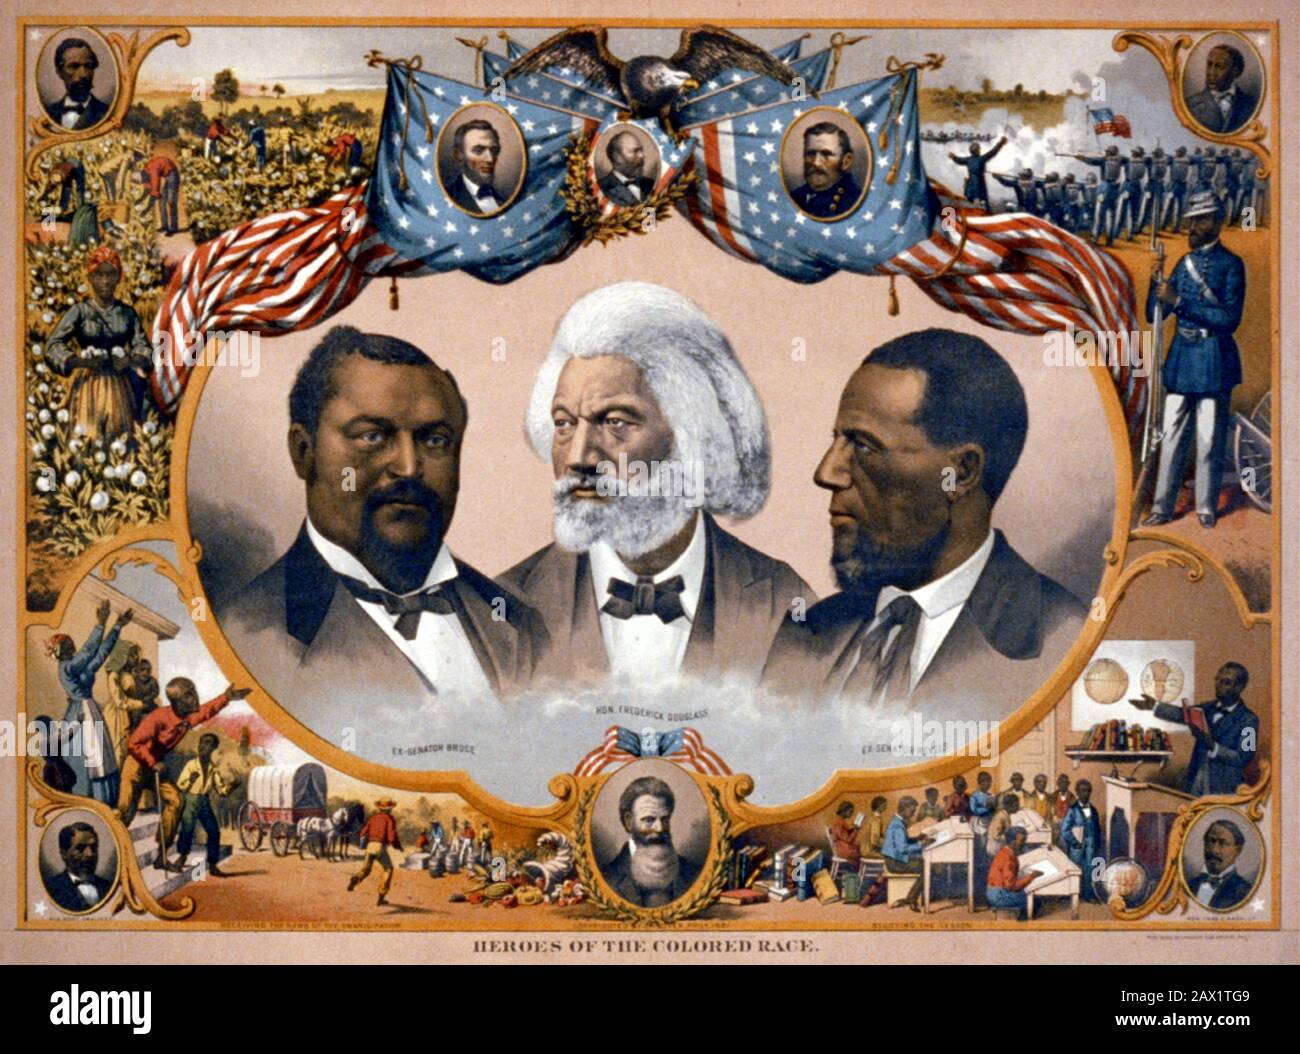 1881  , USA : The U.S.A. President ABRAHAM LINCOLN ( 1809 - 1865 ). Heroes of the colored race Head-and-shoulders portraits of Blanche Kelso Bruce , Frederick Douglass , and Hiram Rhoades Revels surrounded by scenes of African American life and portraits of Jno. R. Lynch, Abraham Lincoln , James A. Garfield , Ulysses S. Grant , Joseph H. Rainey, Charles E. Nash, John Brown , and Robert Smalls.Phila. : Published by J. Hoover, 1881,  1883 .chromolithograph -  Presidente della Repubblica - Stati Uniti -  USA - ritratto - portrait - Abramo - GUERRA CIVILE  DI SECESSIONE - SECESSIONISM WAR CIVIL - Stock Photo